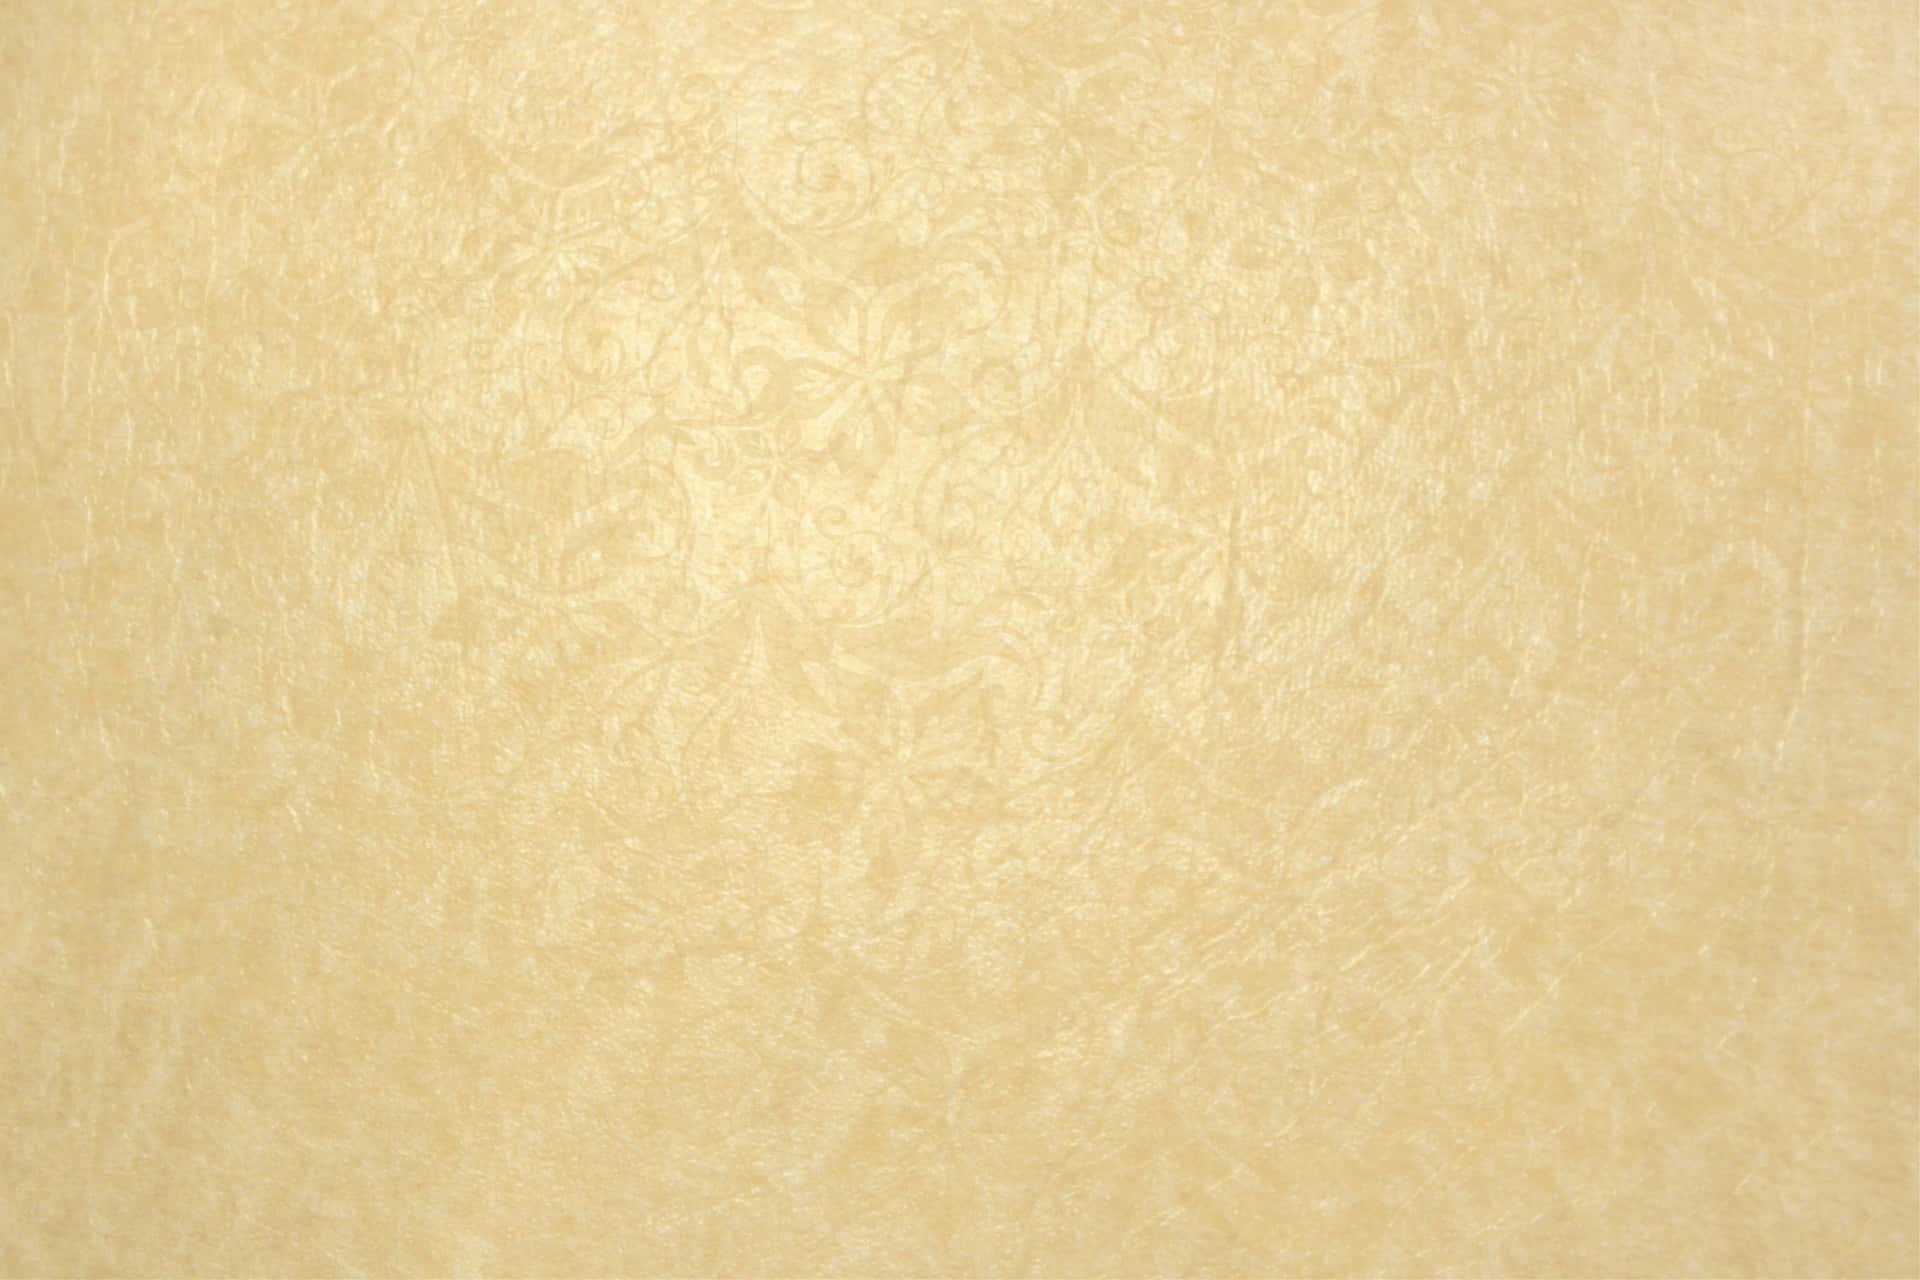 Creamy beige background that looks inviting to the eye